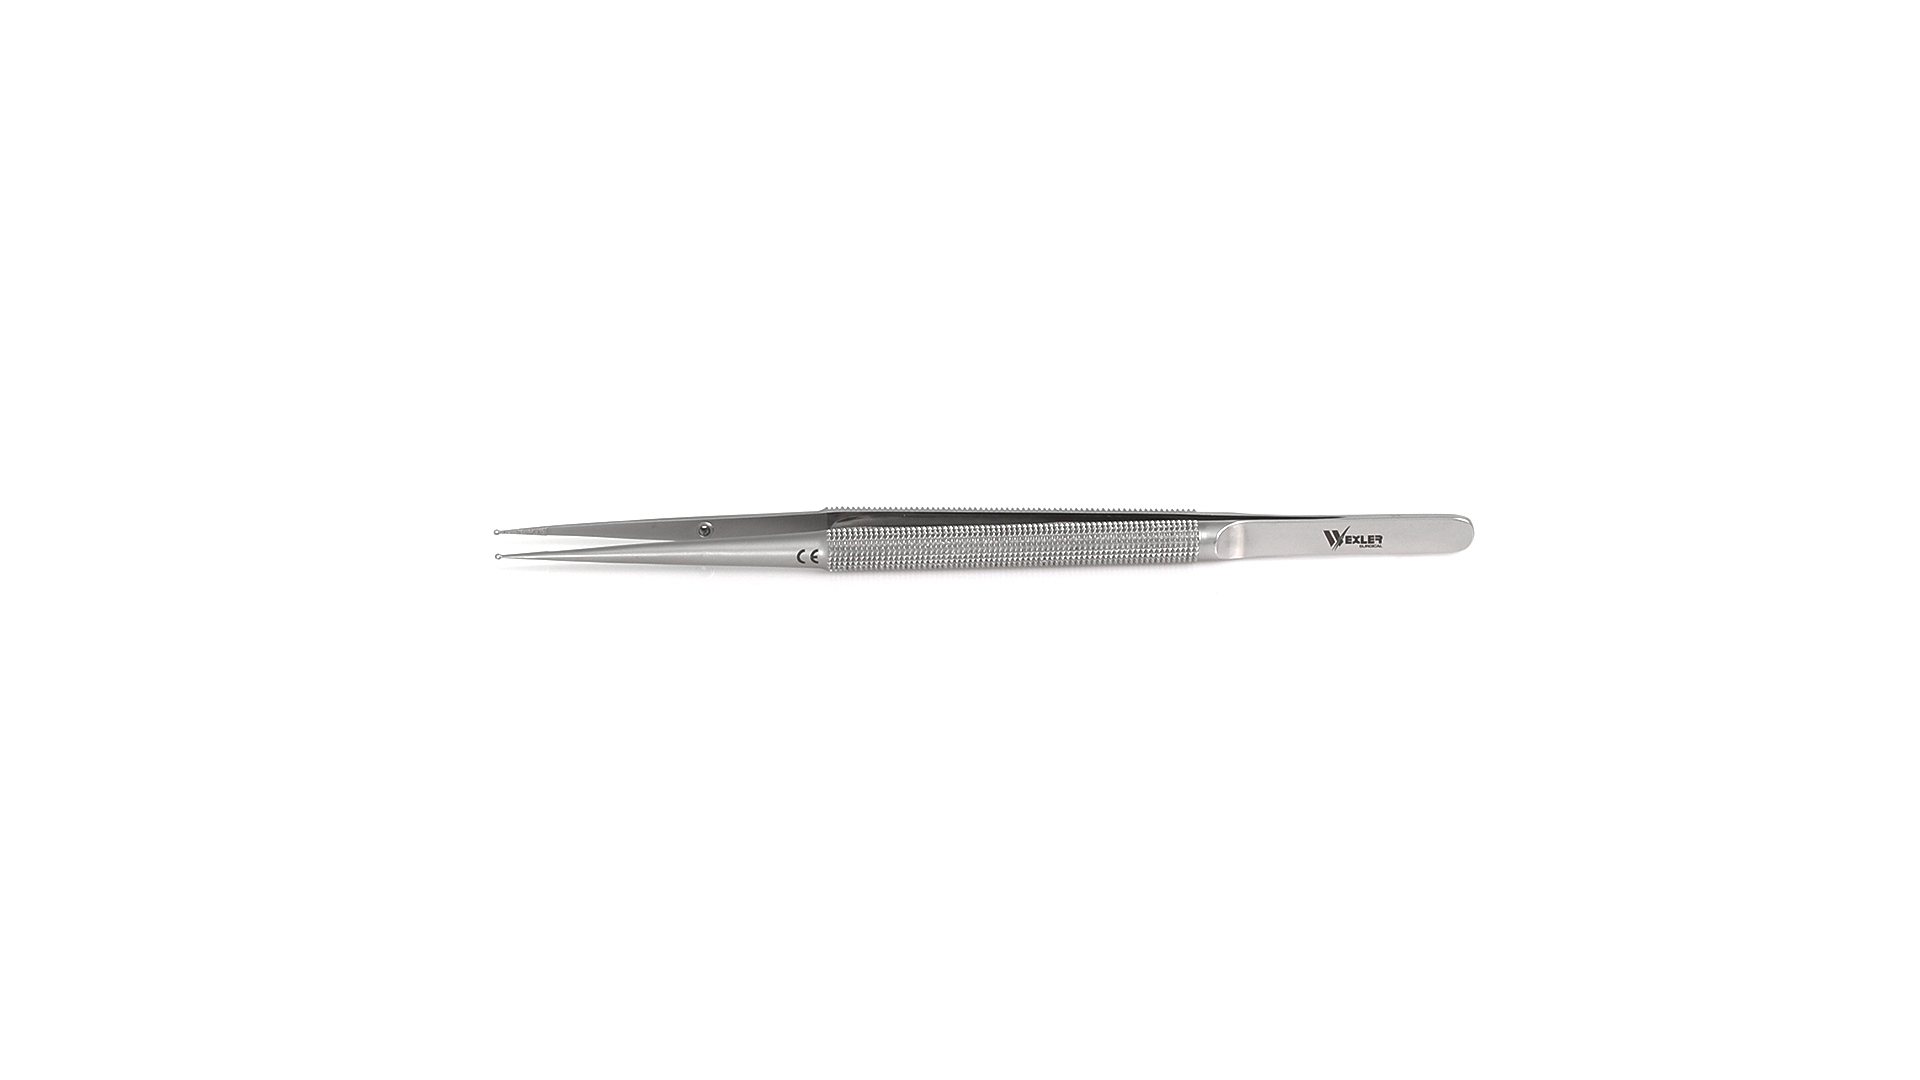 Ring tip Forceps - Straight 1mm rings w/TC coated platform